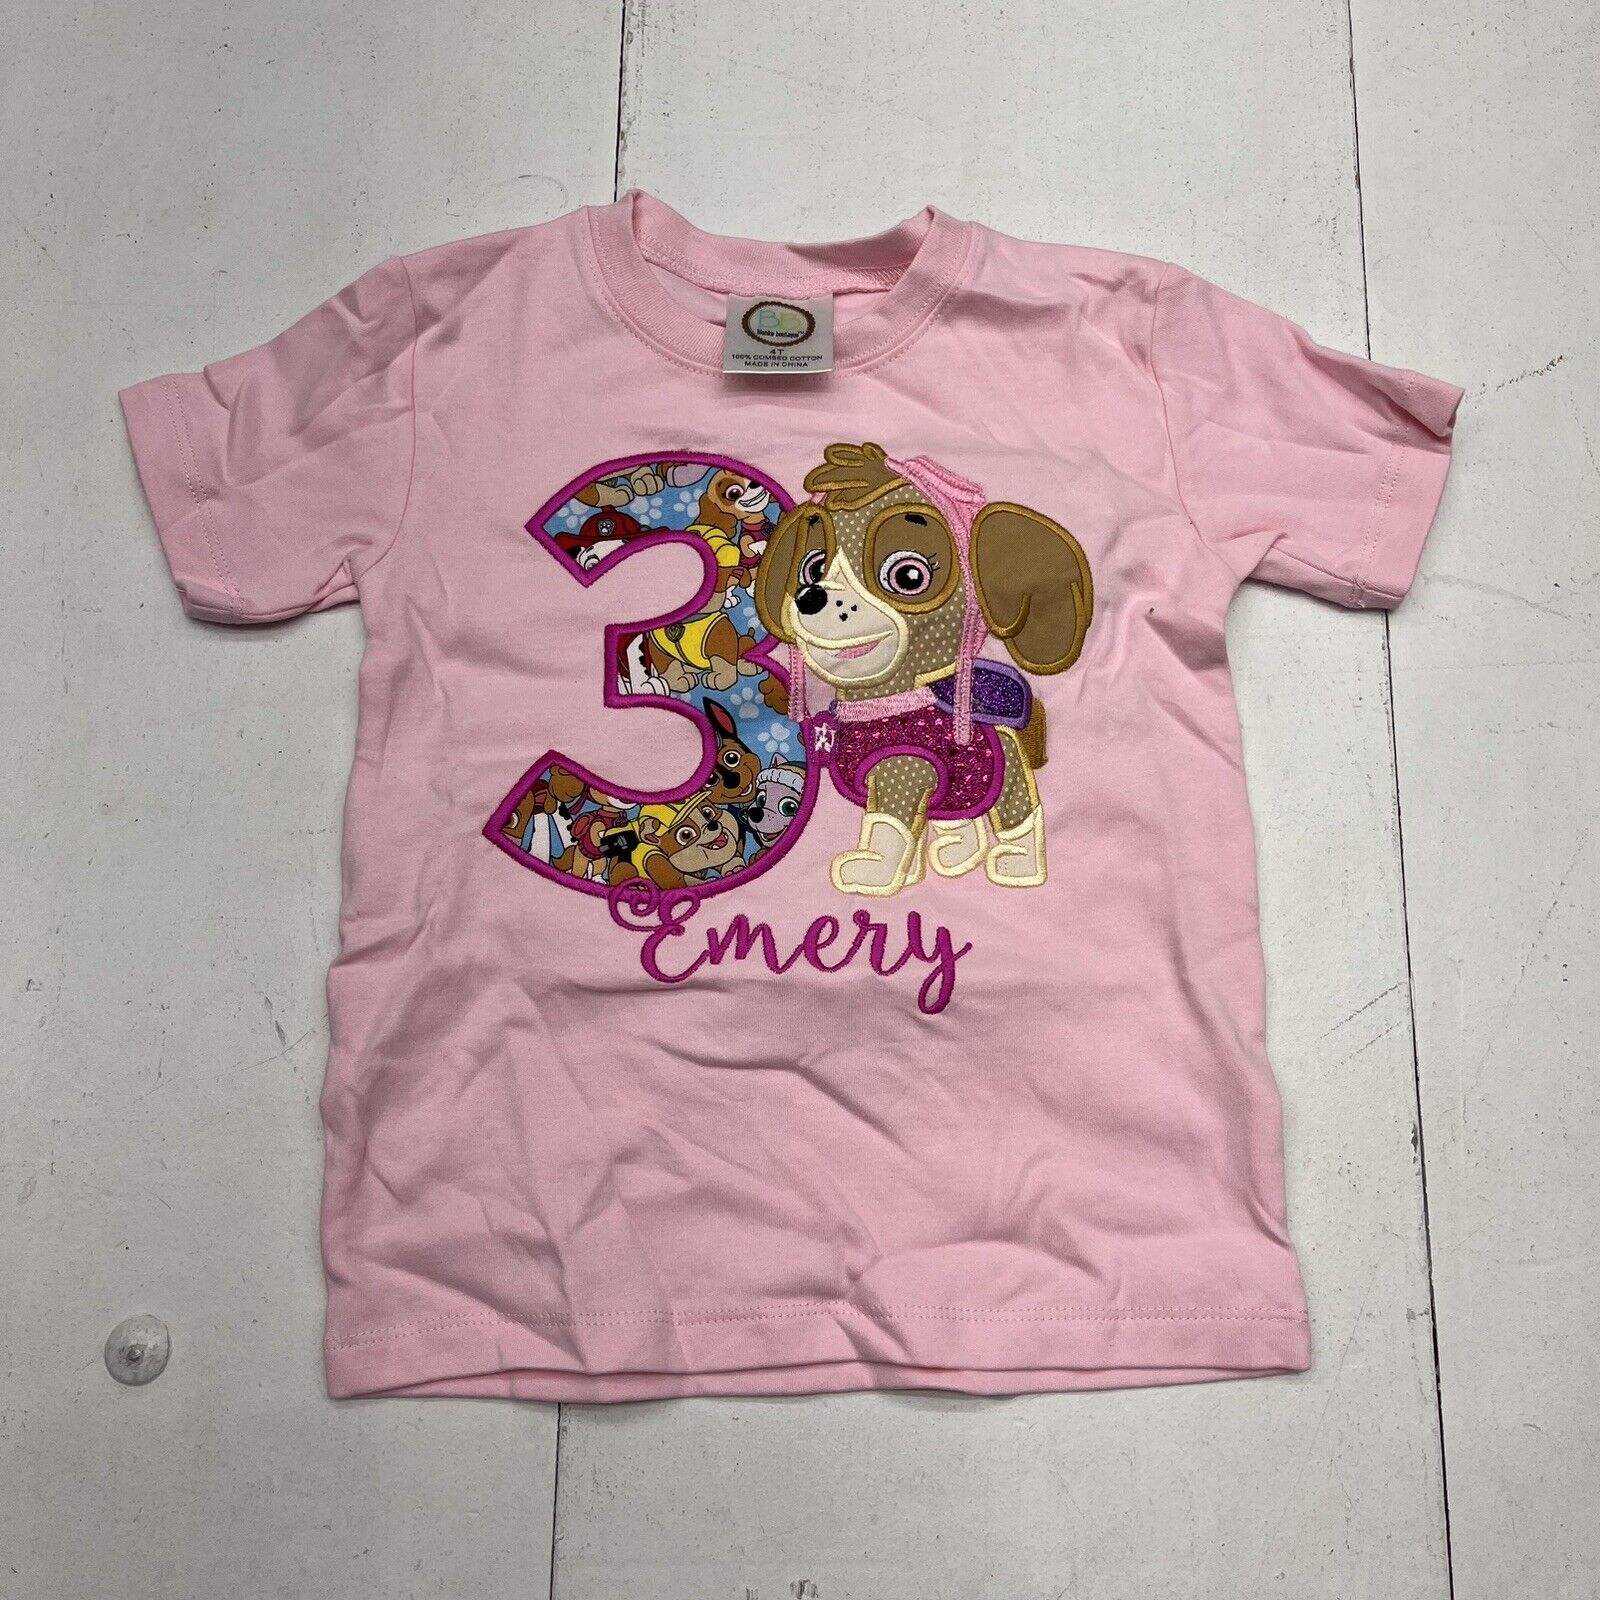 Blanke Boutique Pink Paw Patrol Short Sleeve T-Shirt Girls Size 4T NEW -  beyond exchange